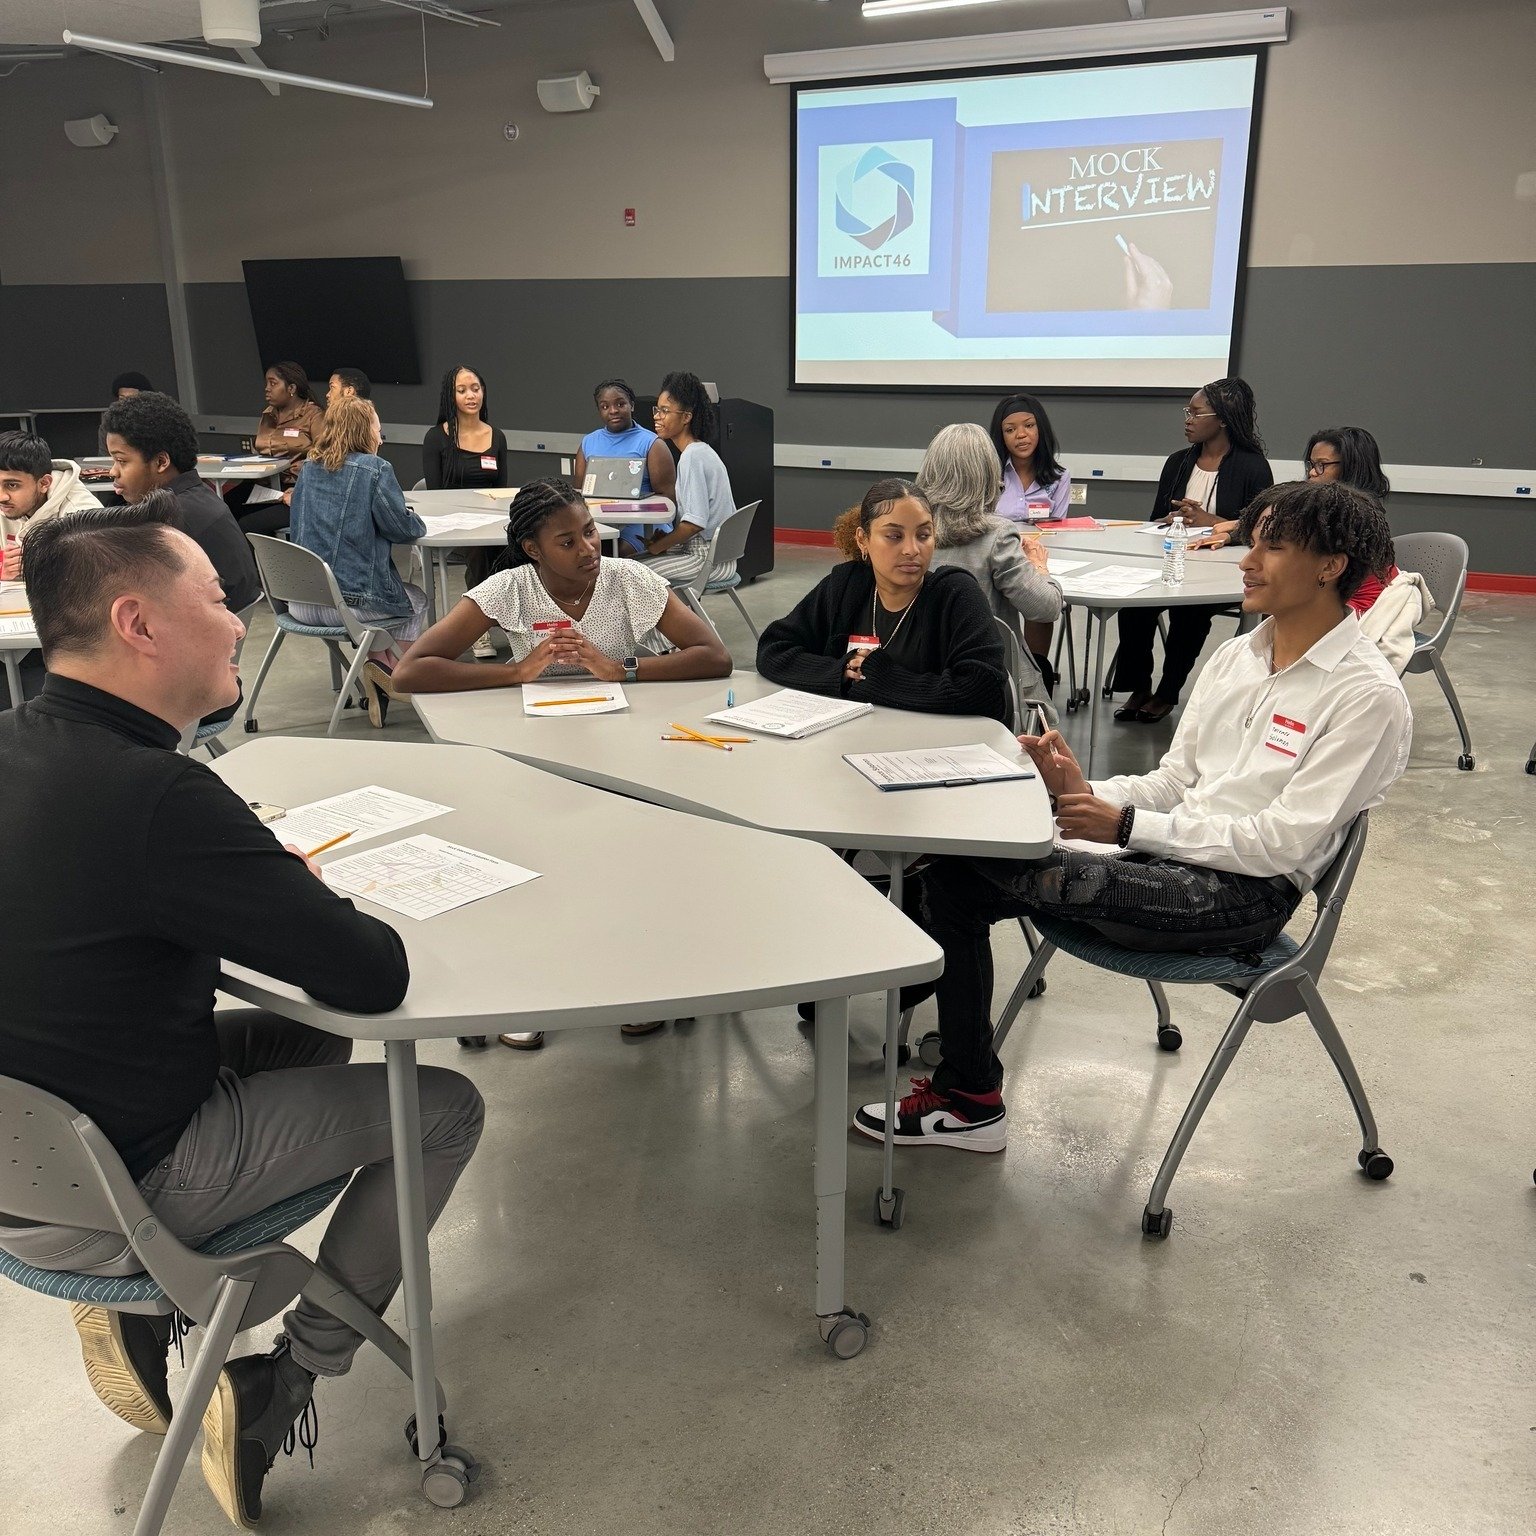 🎉Congratulations to the 67 students who completed our Workforce Development Training from March 25-28 at Central and Discovery High School! 🌟 Over four days, they honed their skills in resume building, identified both hard and soft skills, prepped 